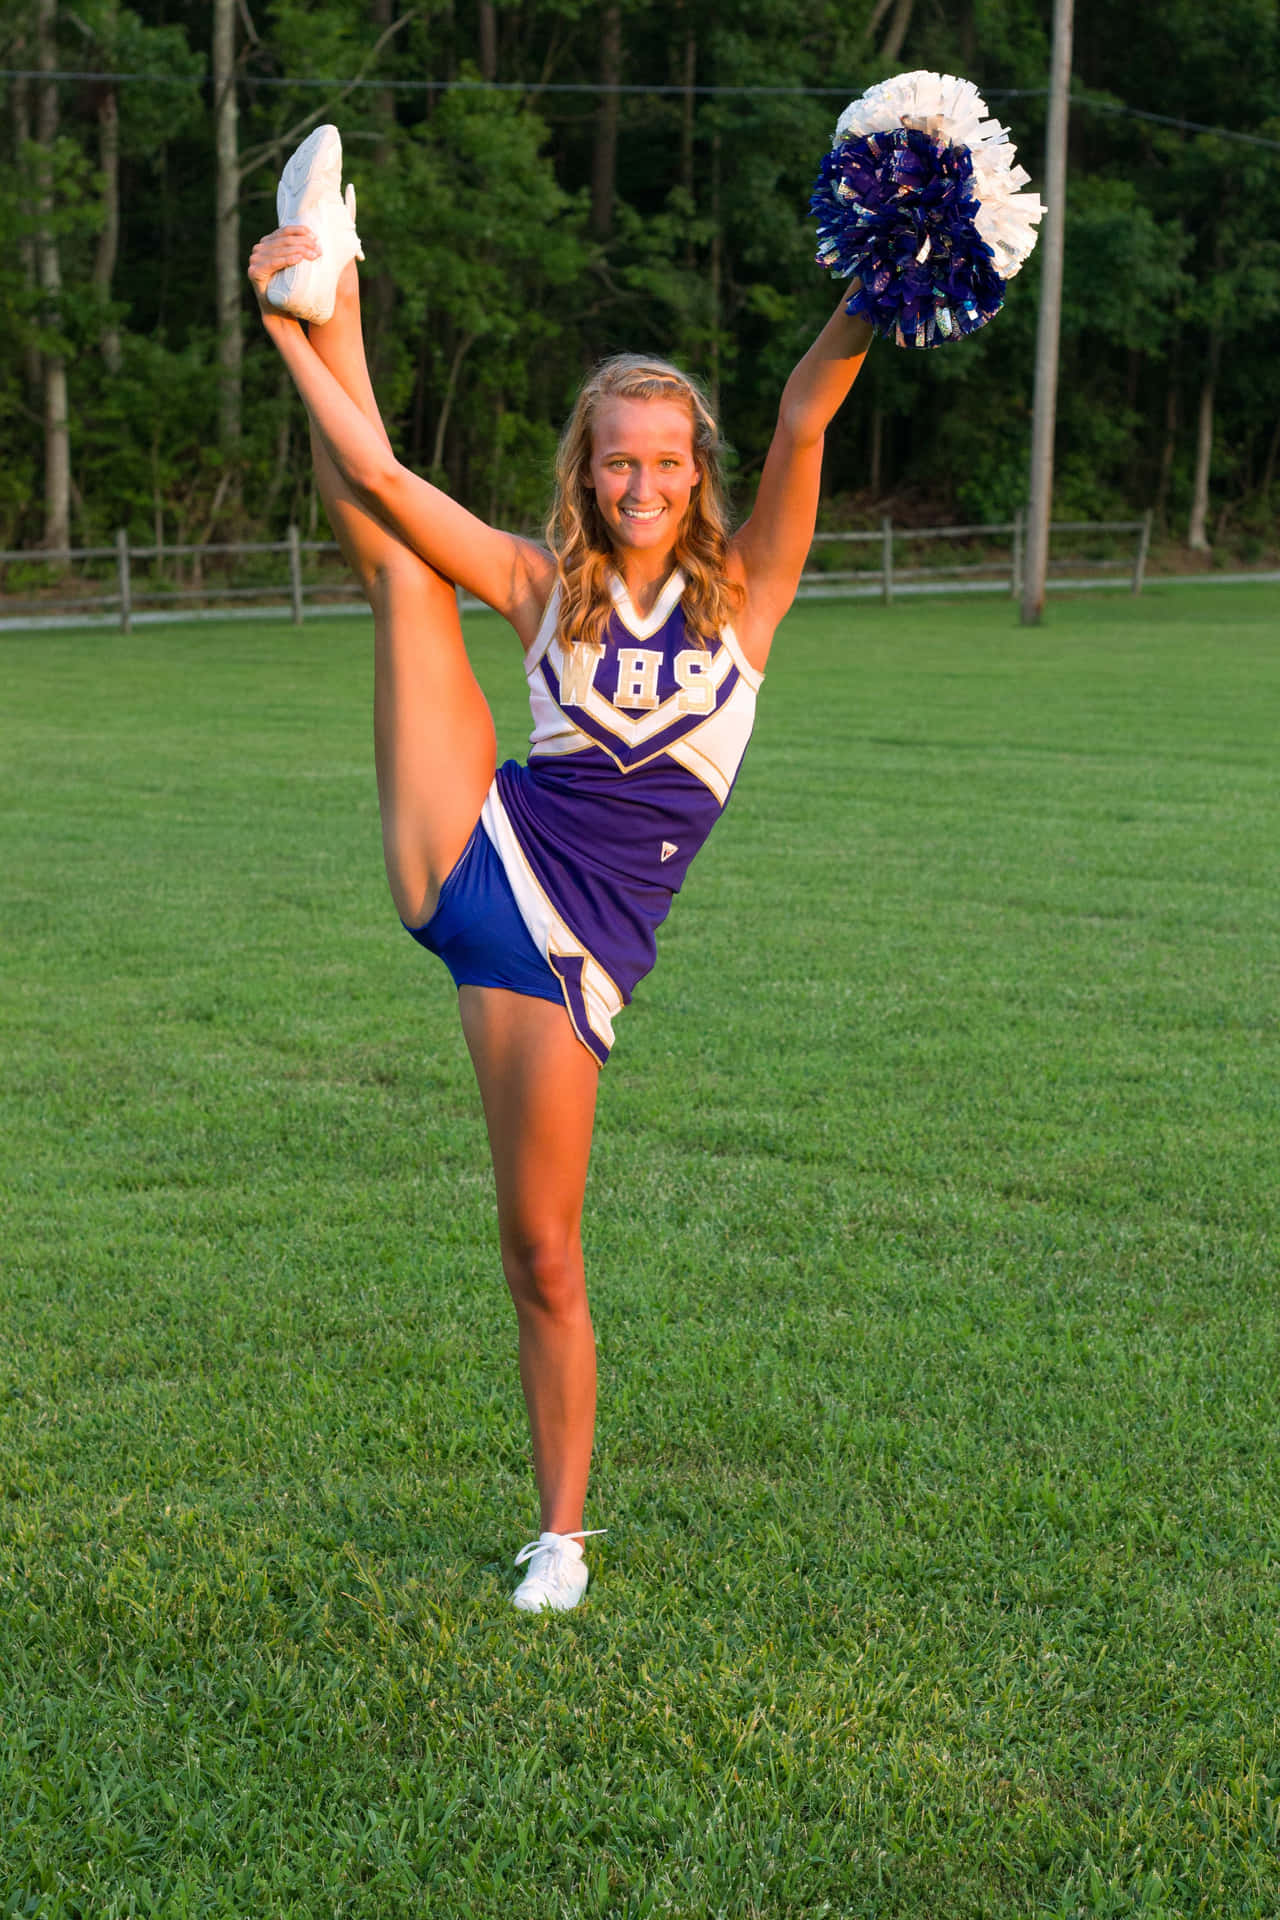 Cheer Pictures Poses - Lemon8 Search